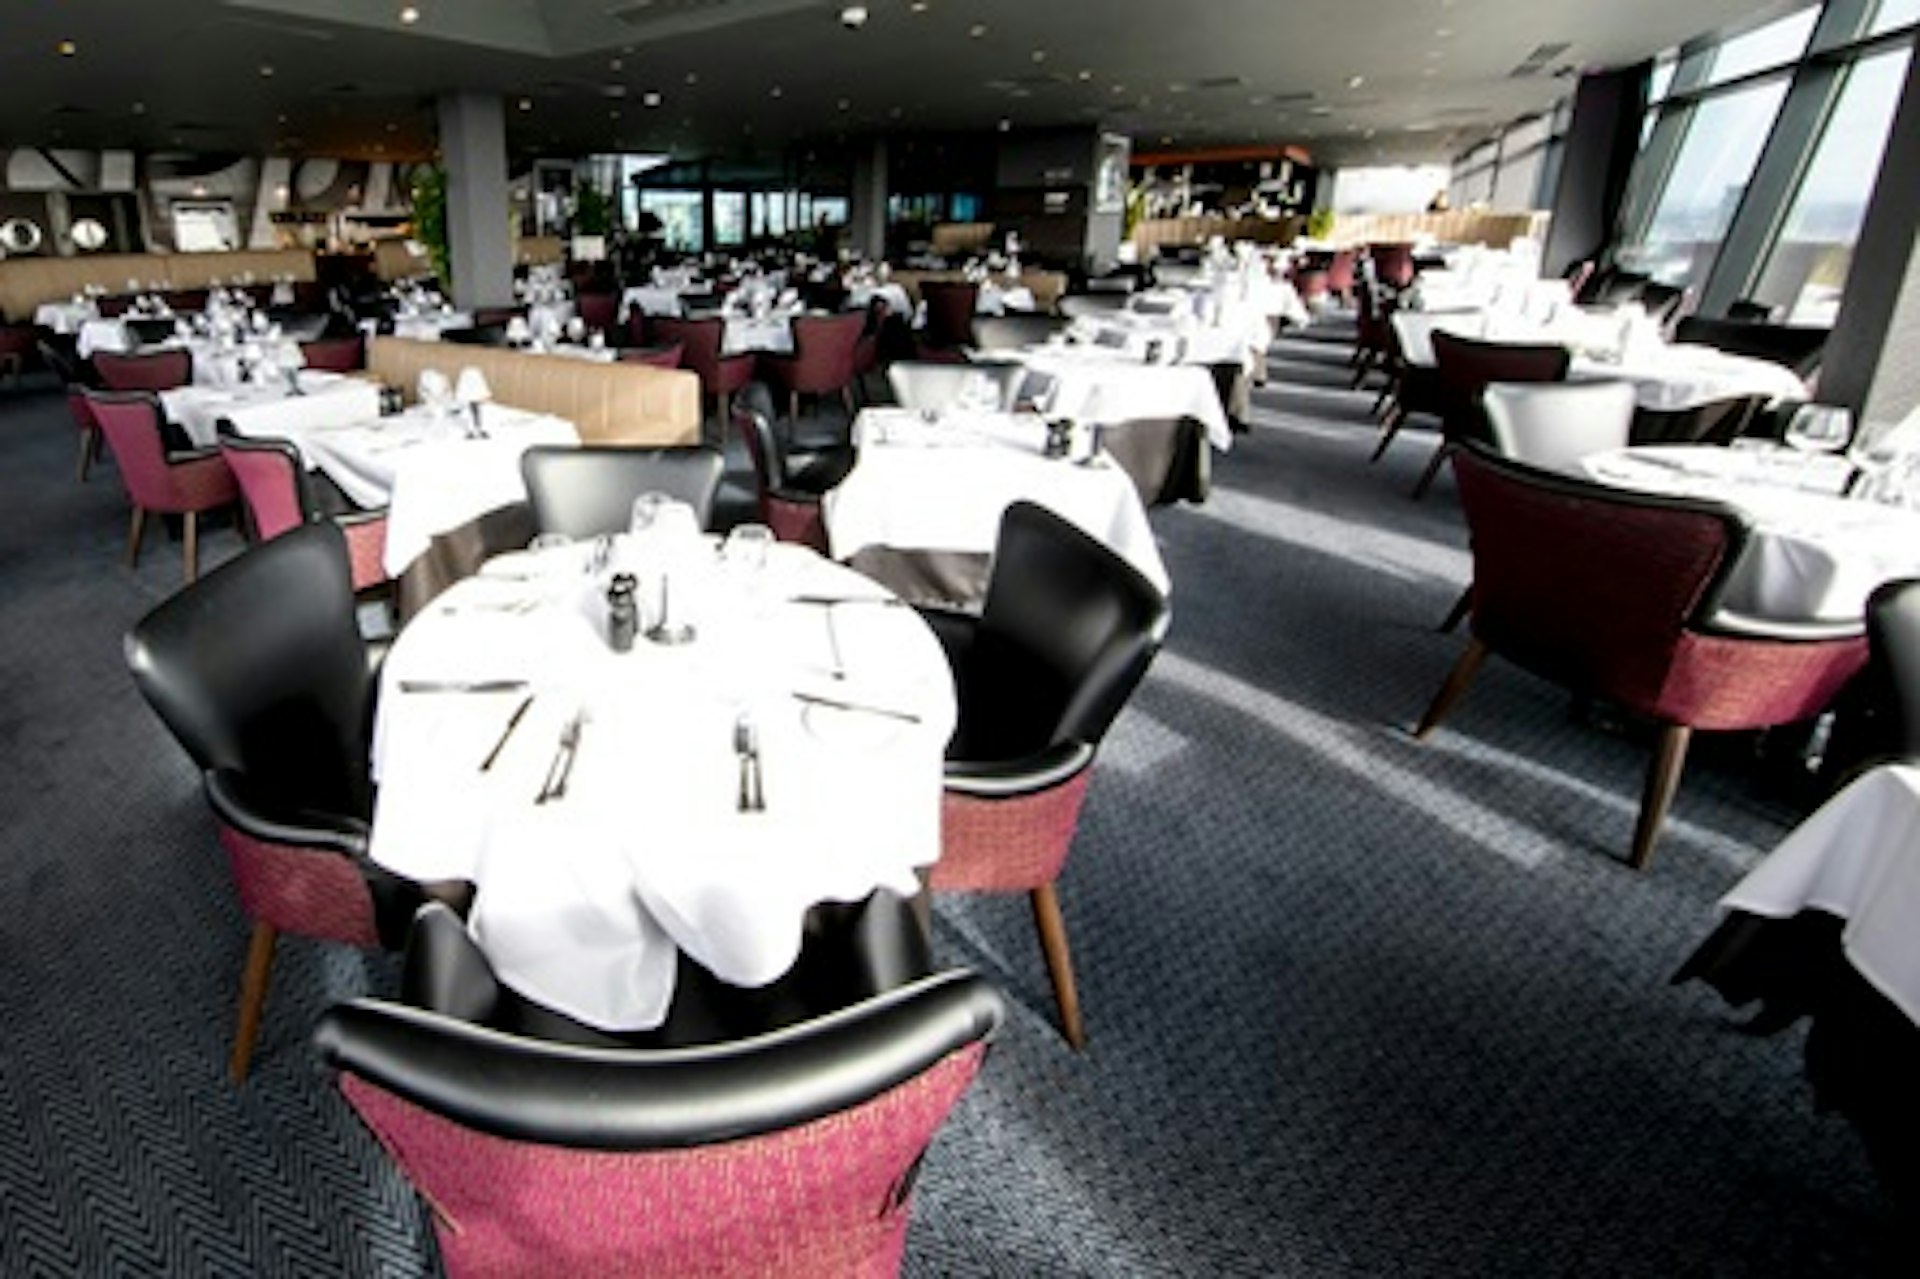 Two Course Meal with Prosecco for Two at Marco Pierre White Restaurant, Birmingham 3